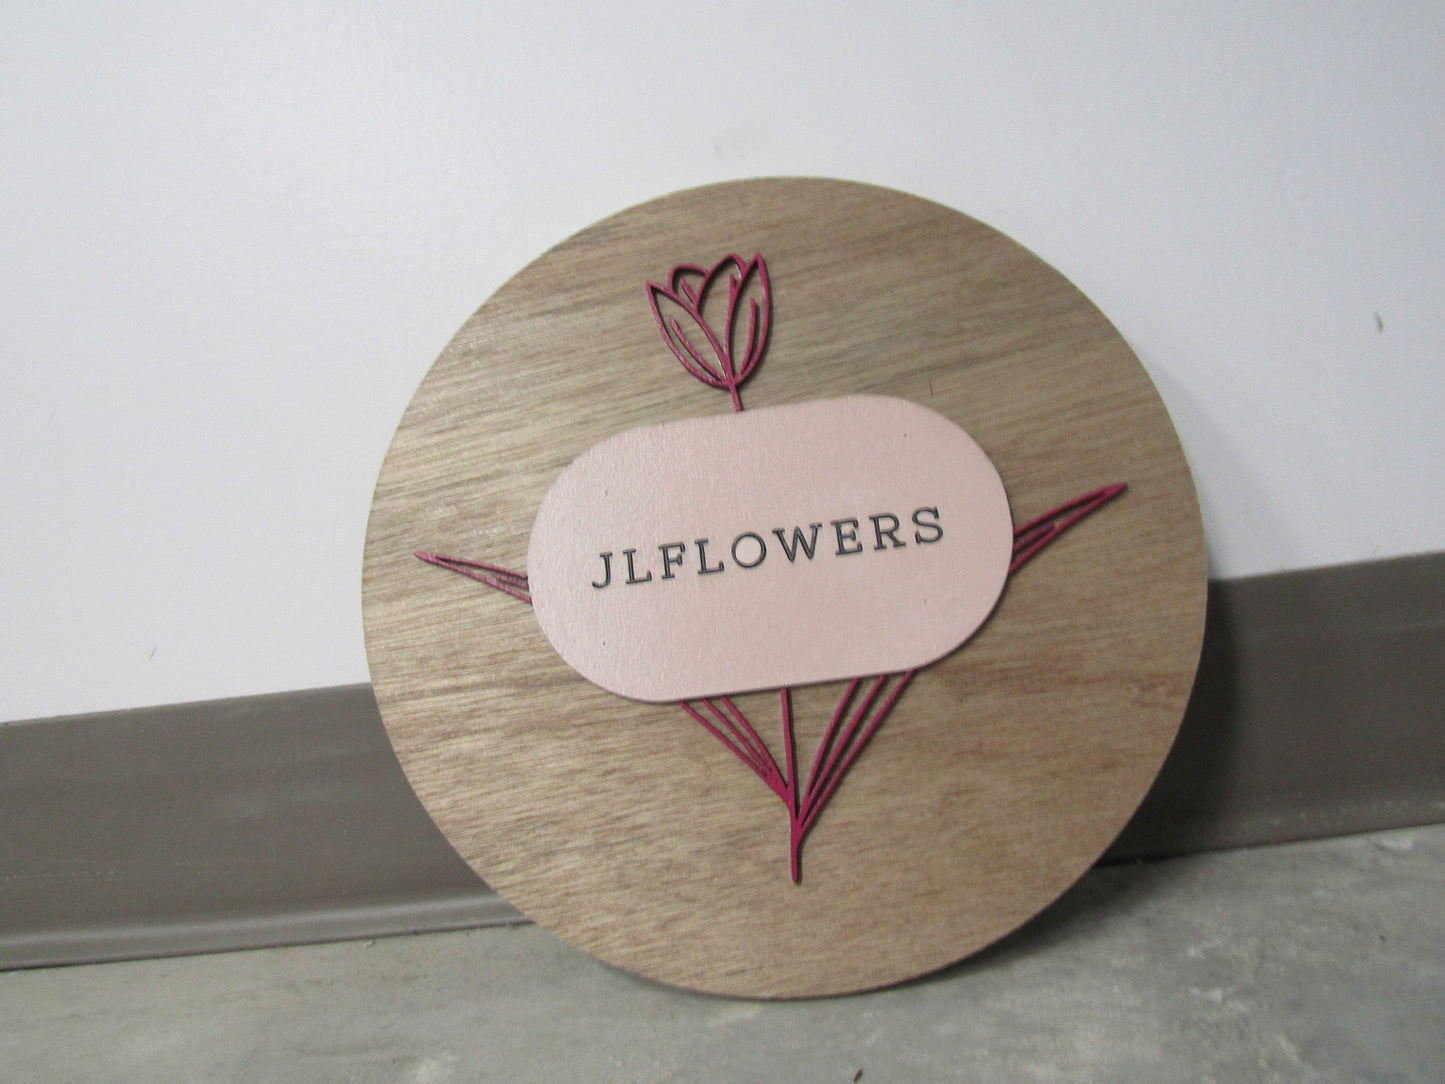 Custom Flower Sign Round Rustic Floral Small Business Booth Vendor Made to Order Logo Circle Wooden Handmade Raised Text Home